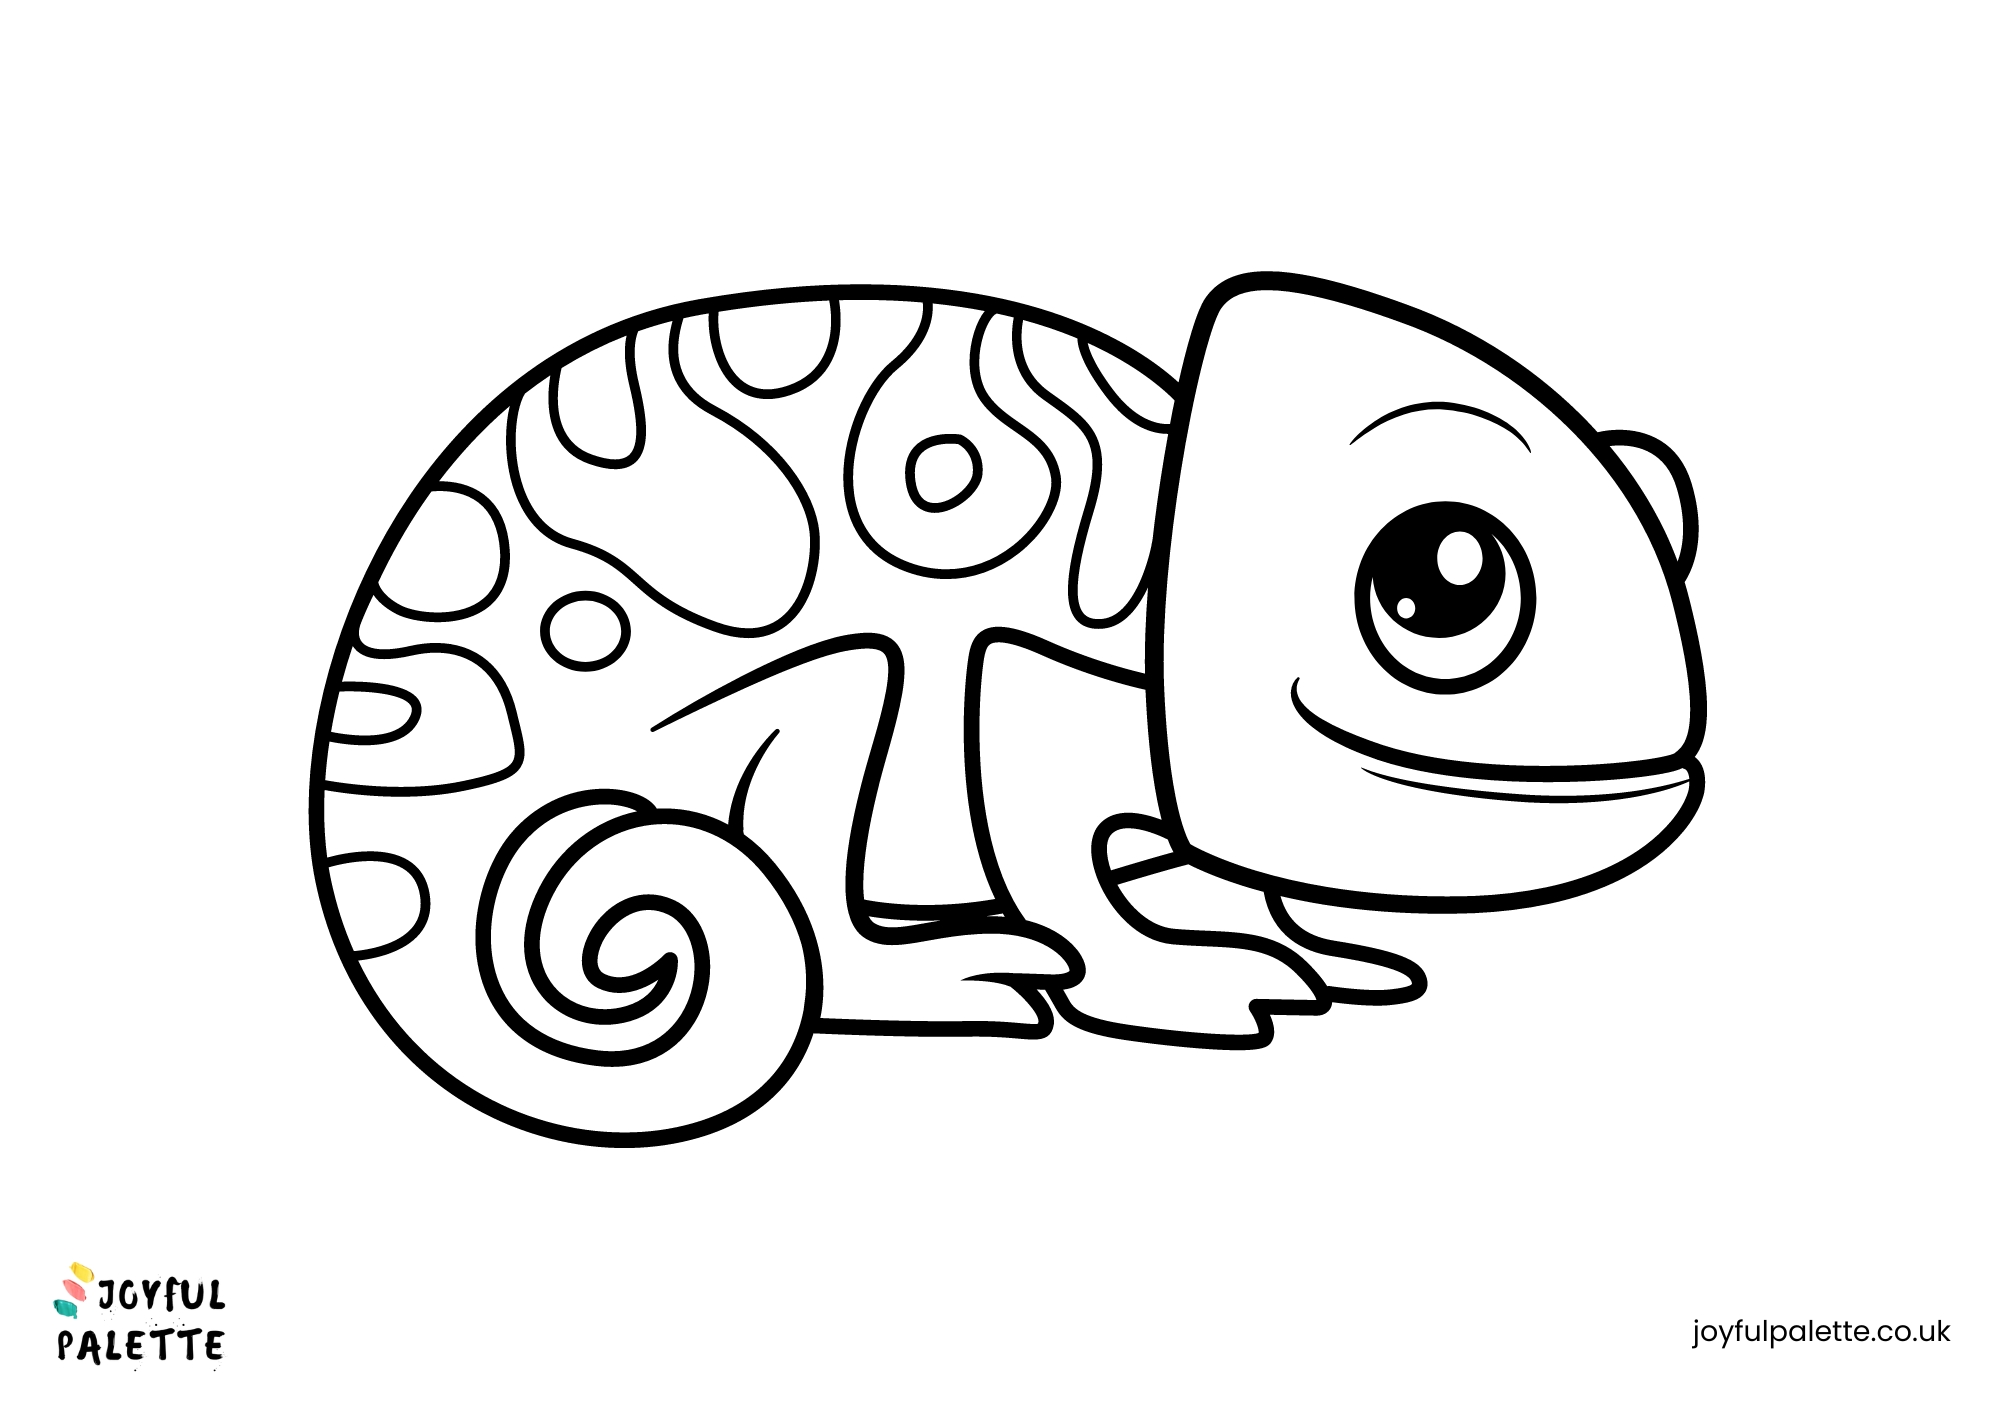 Chameleon Coloring Page for Preschoolers